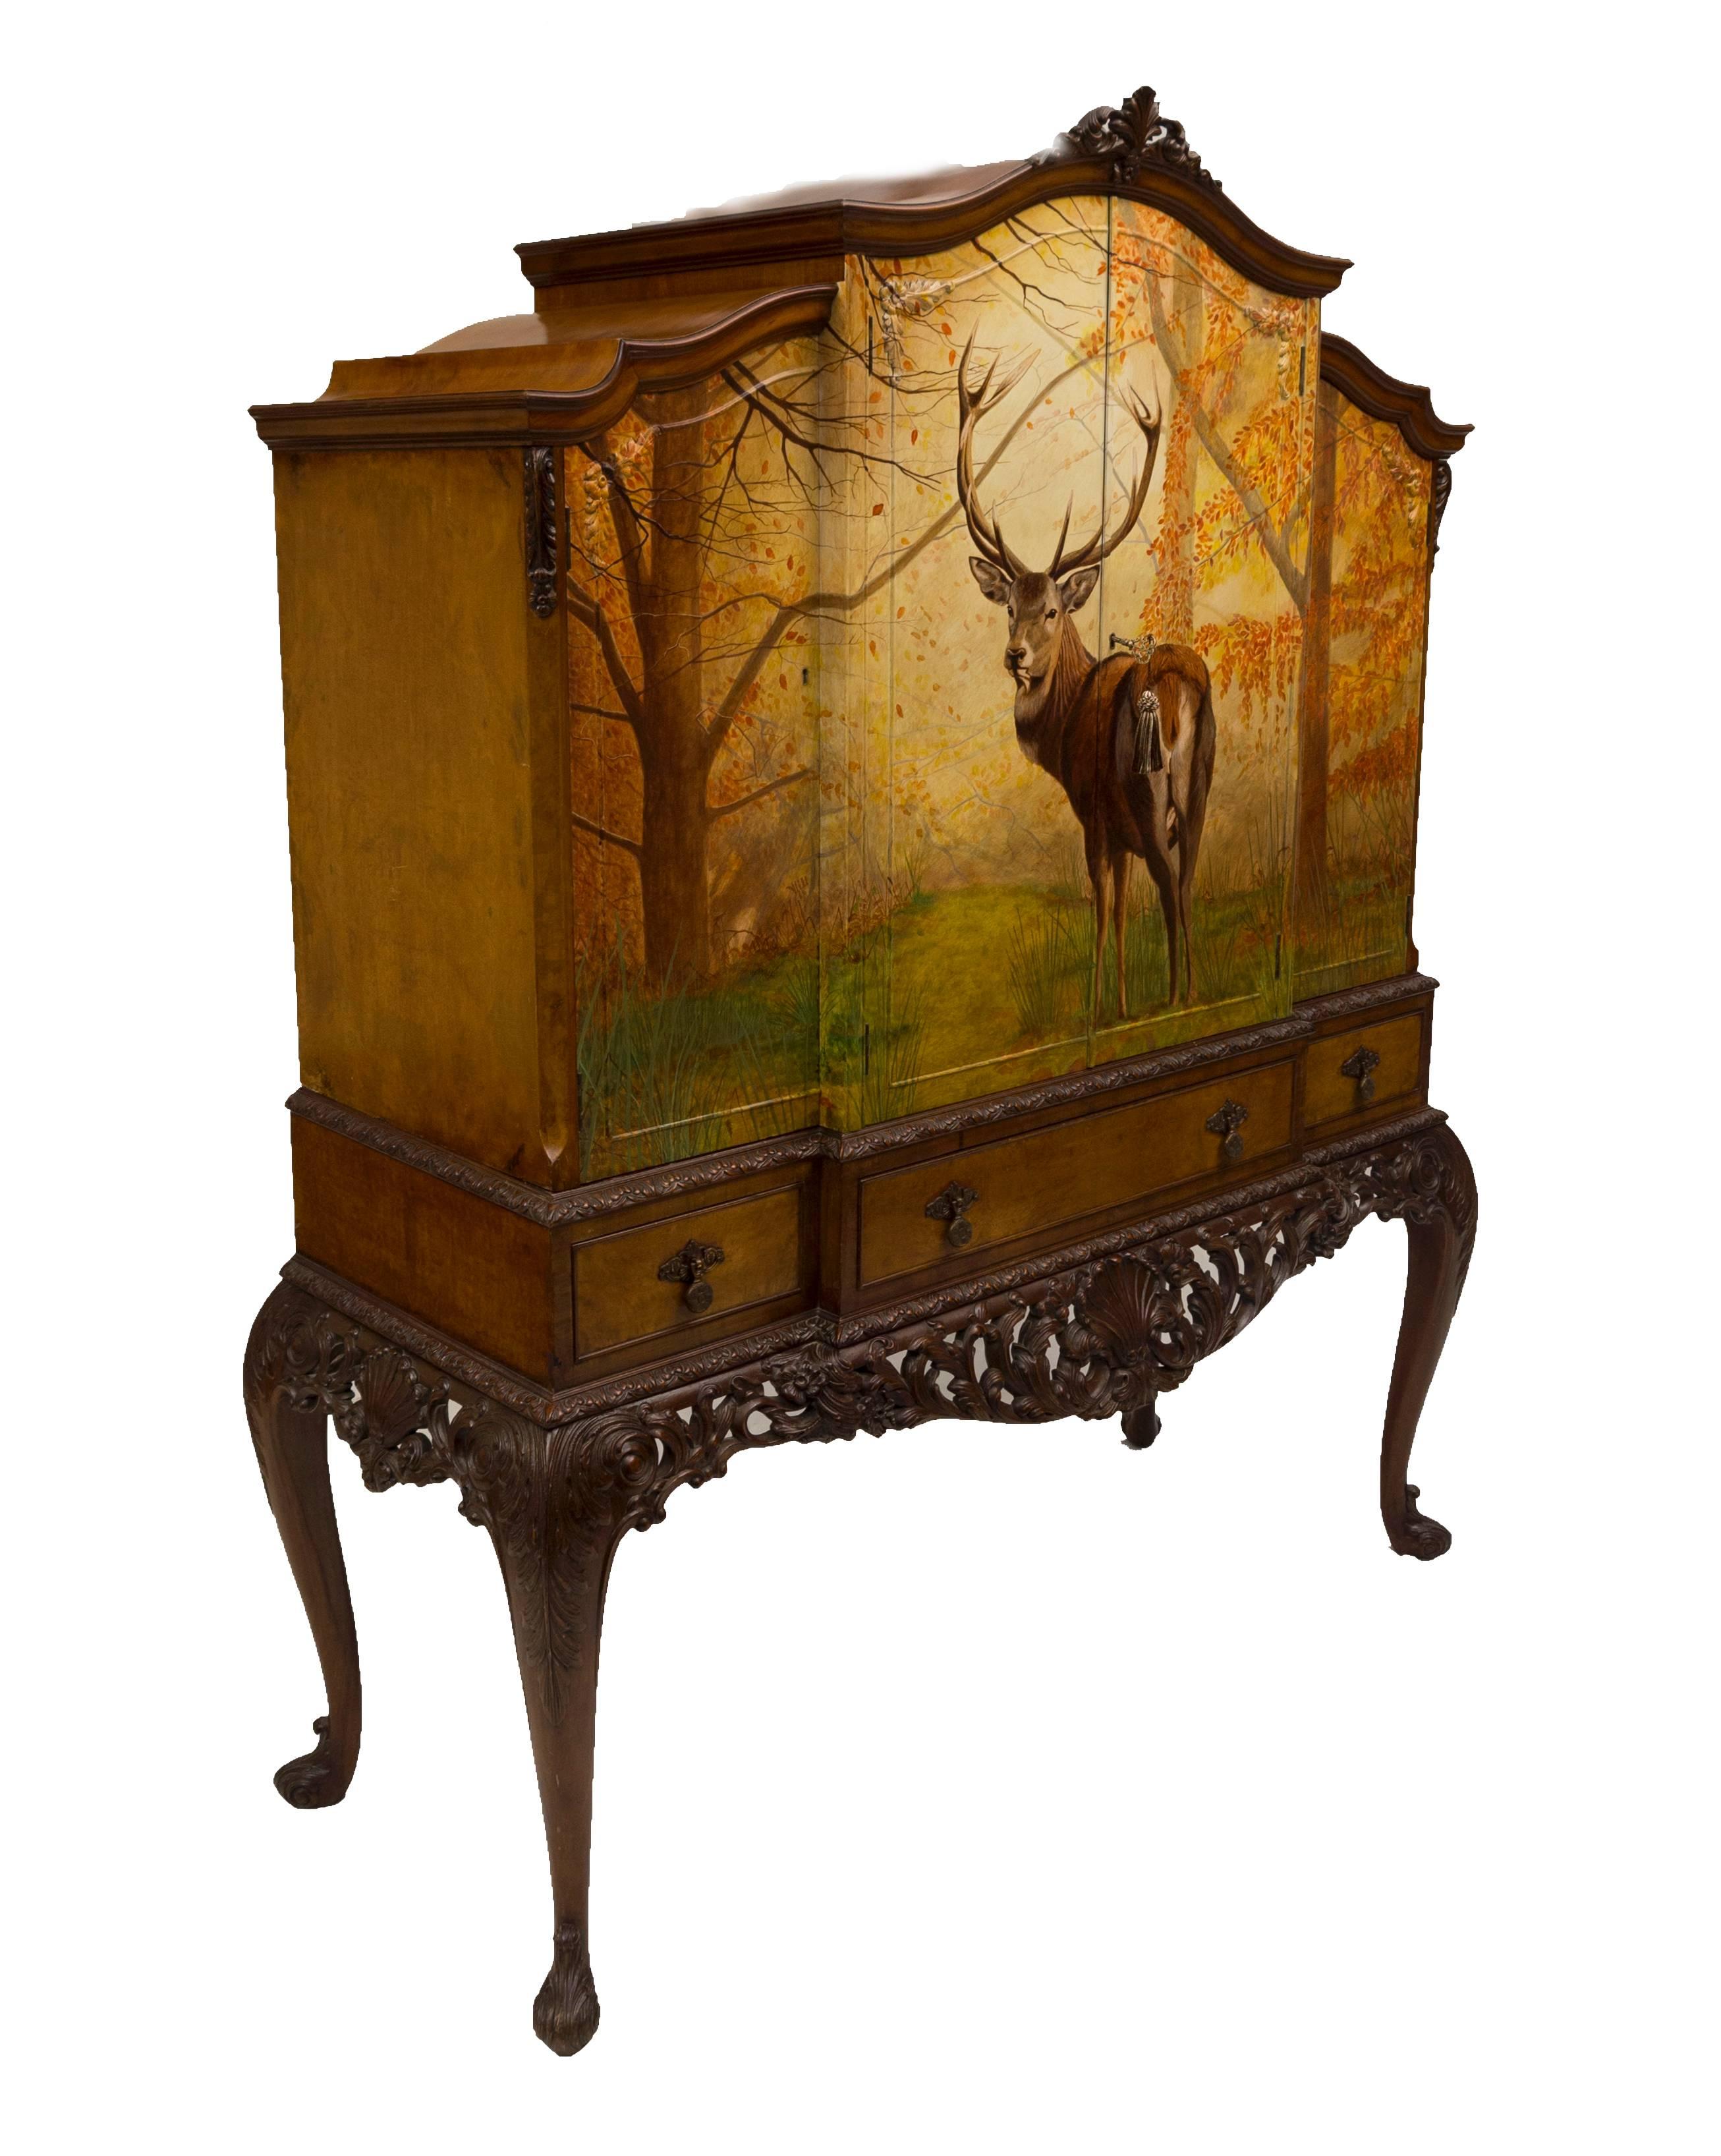 This burr walnut cocktail cabinet is intrinsic in design and appeal. The Majestic Stag in an autumn forest backdrop gracefully adorns this 1920s cabinet. The antique cabinet has been refurbished to a high standard and hand-painted by Kensa Designs.